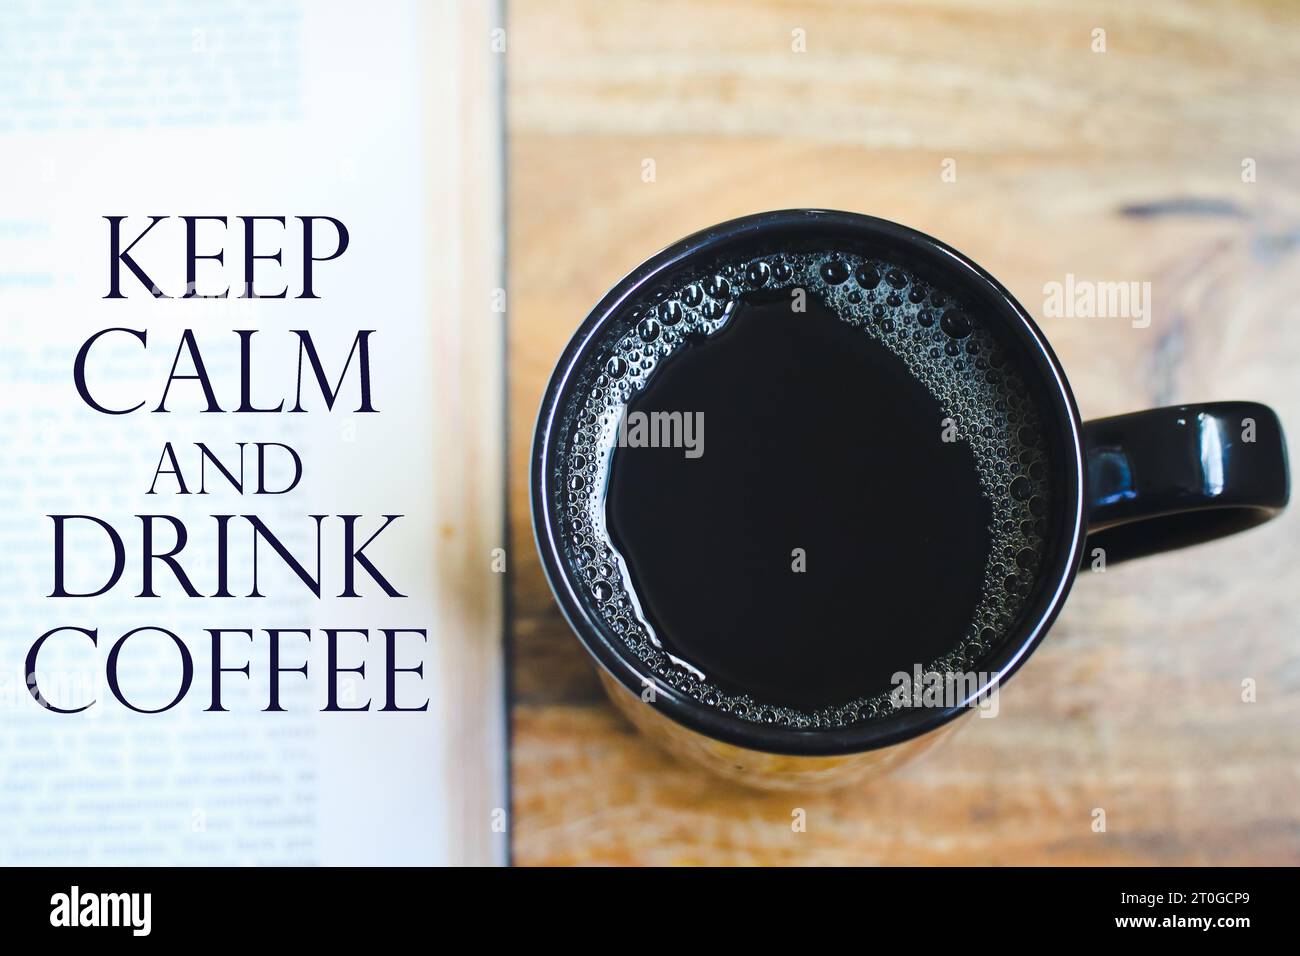 https://c8.alamy.com/comp/2T0GCP9/quote-saying-motivational-and-inspirational-quotes-keep-calm-and-drink-coffee-2T0GCP9.jpg